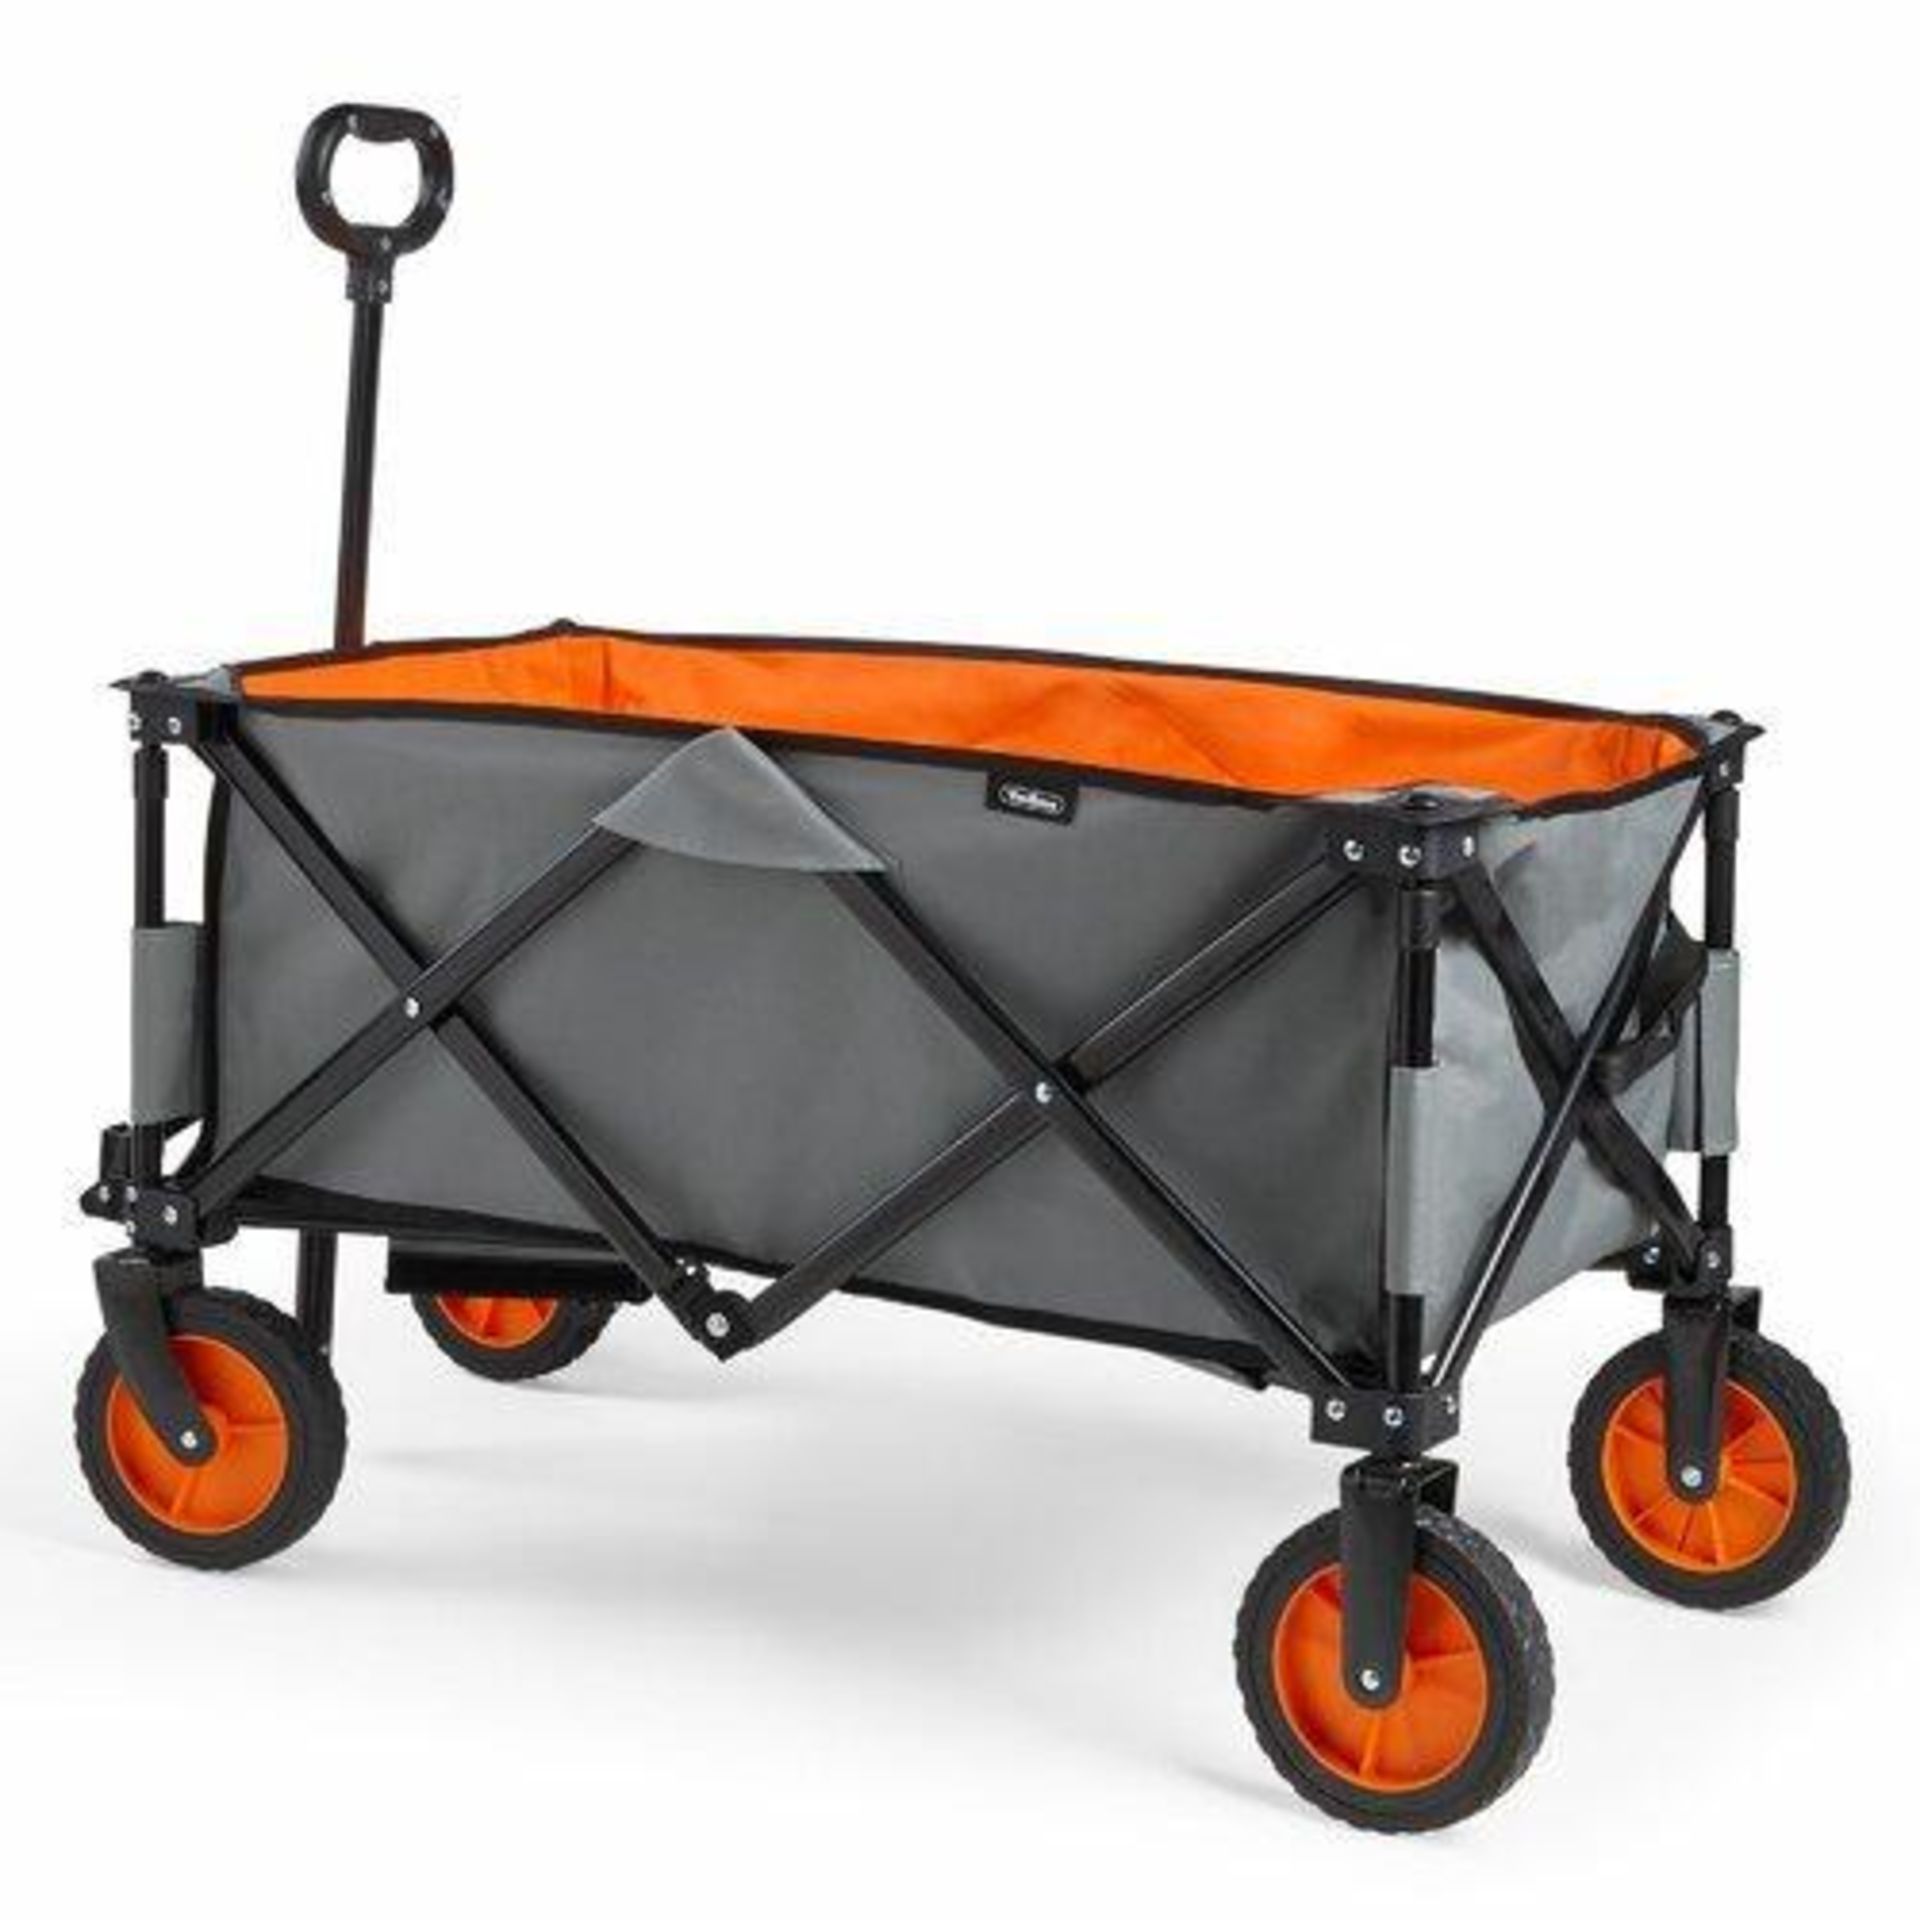 Folding Cart - ER7. Whether youâ€™re going to a festival or on a camping trip, say goodbye to